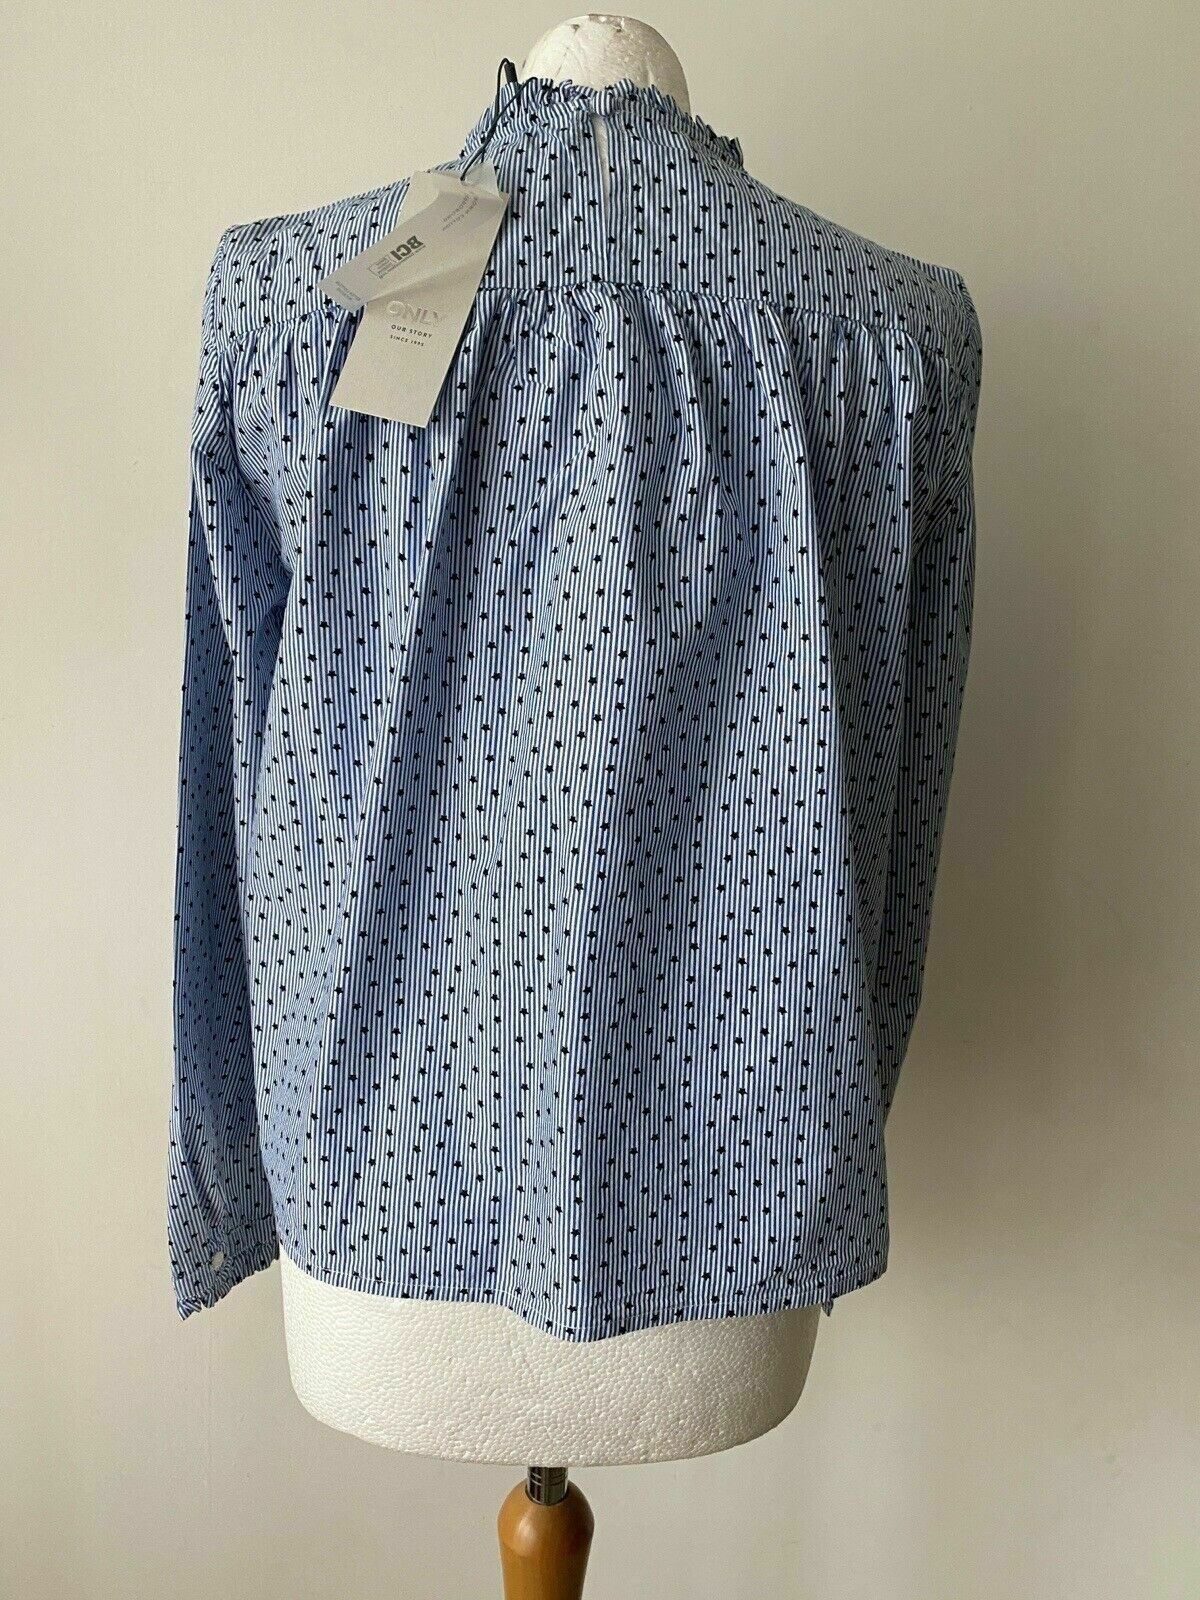 ONLY Strip Stars Smock top Size 10 Frill Neck